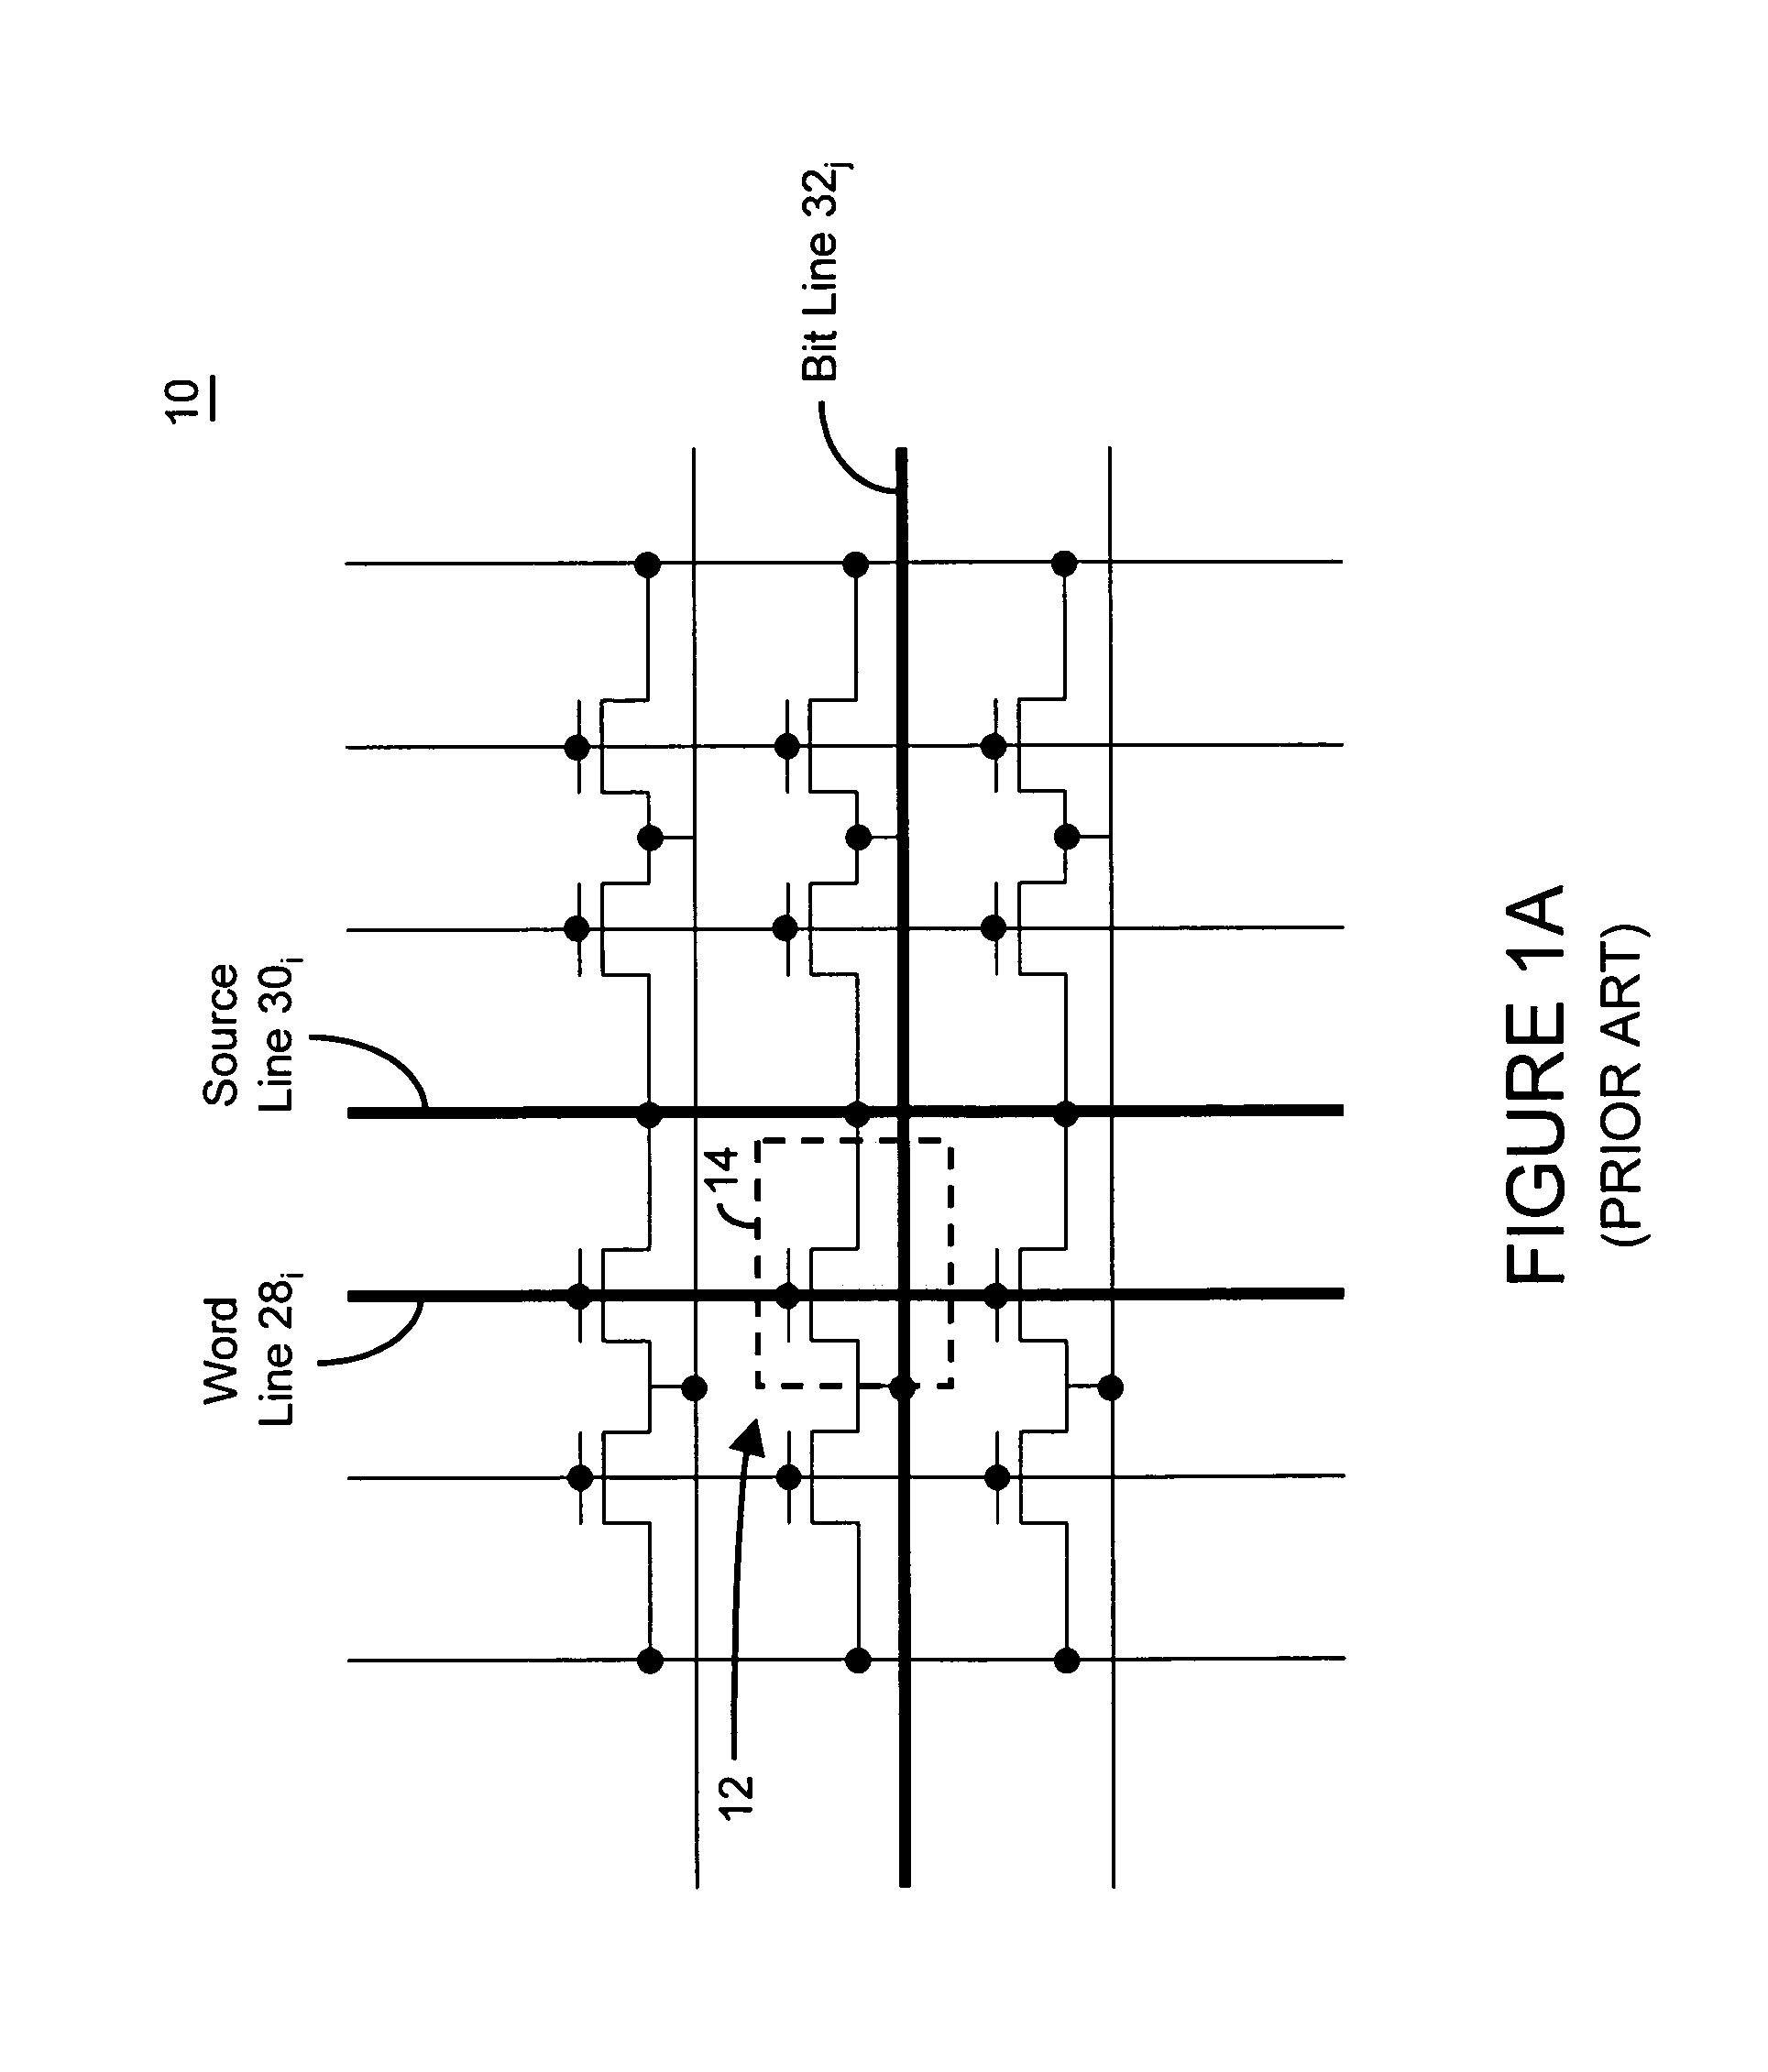 Electrically floating body memory cell and array, and method of operating or controlling same